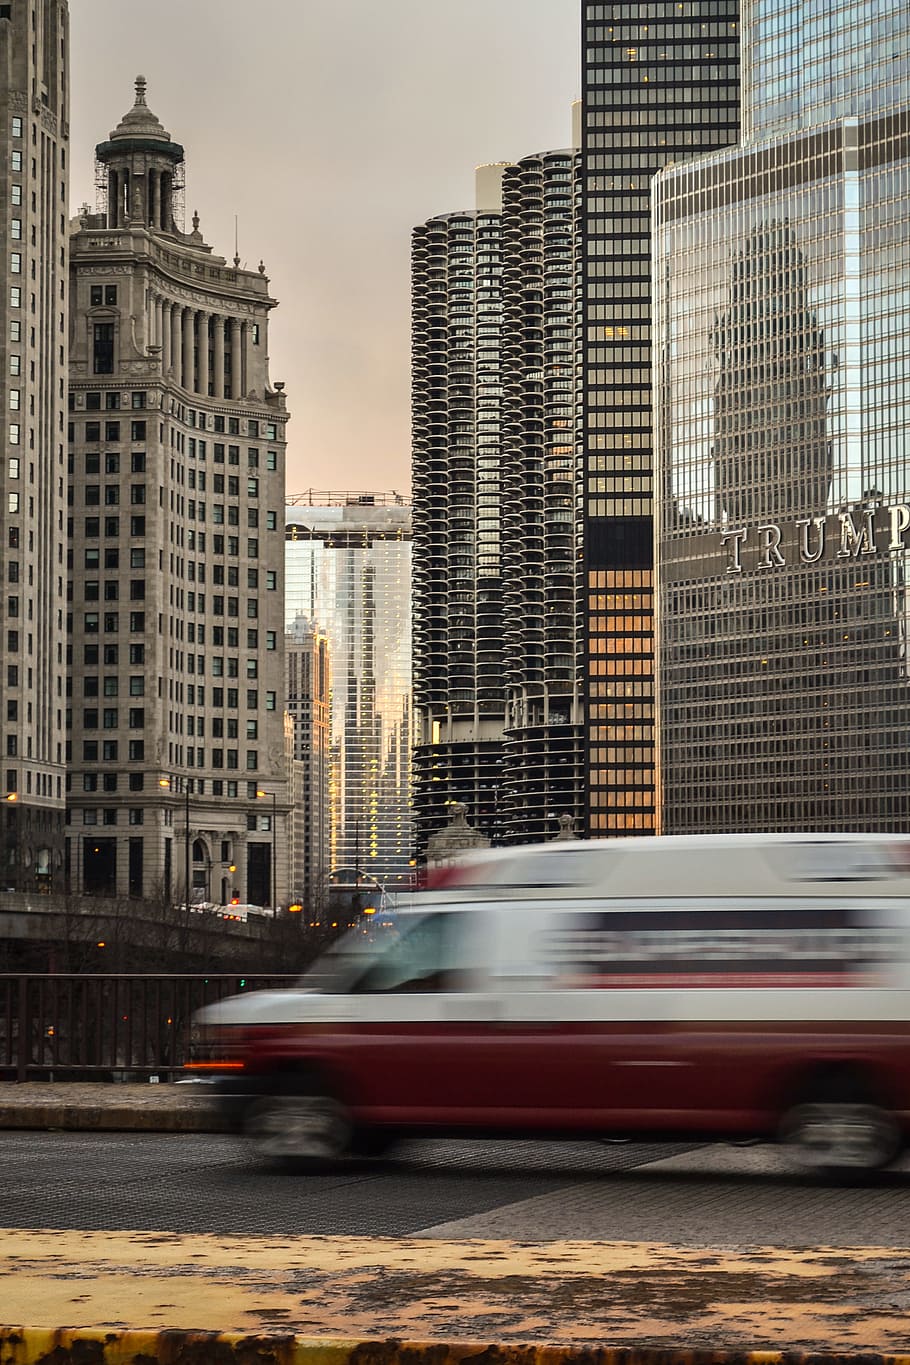 A blurry car on a bridge in a city with skyscrapers at the back, red and white van on road near glass building at daytime